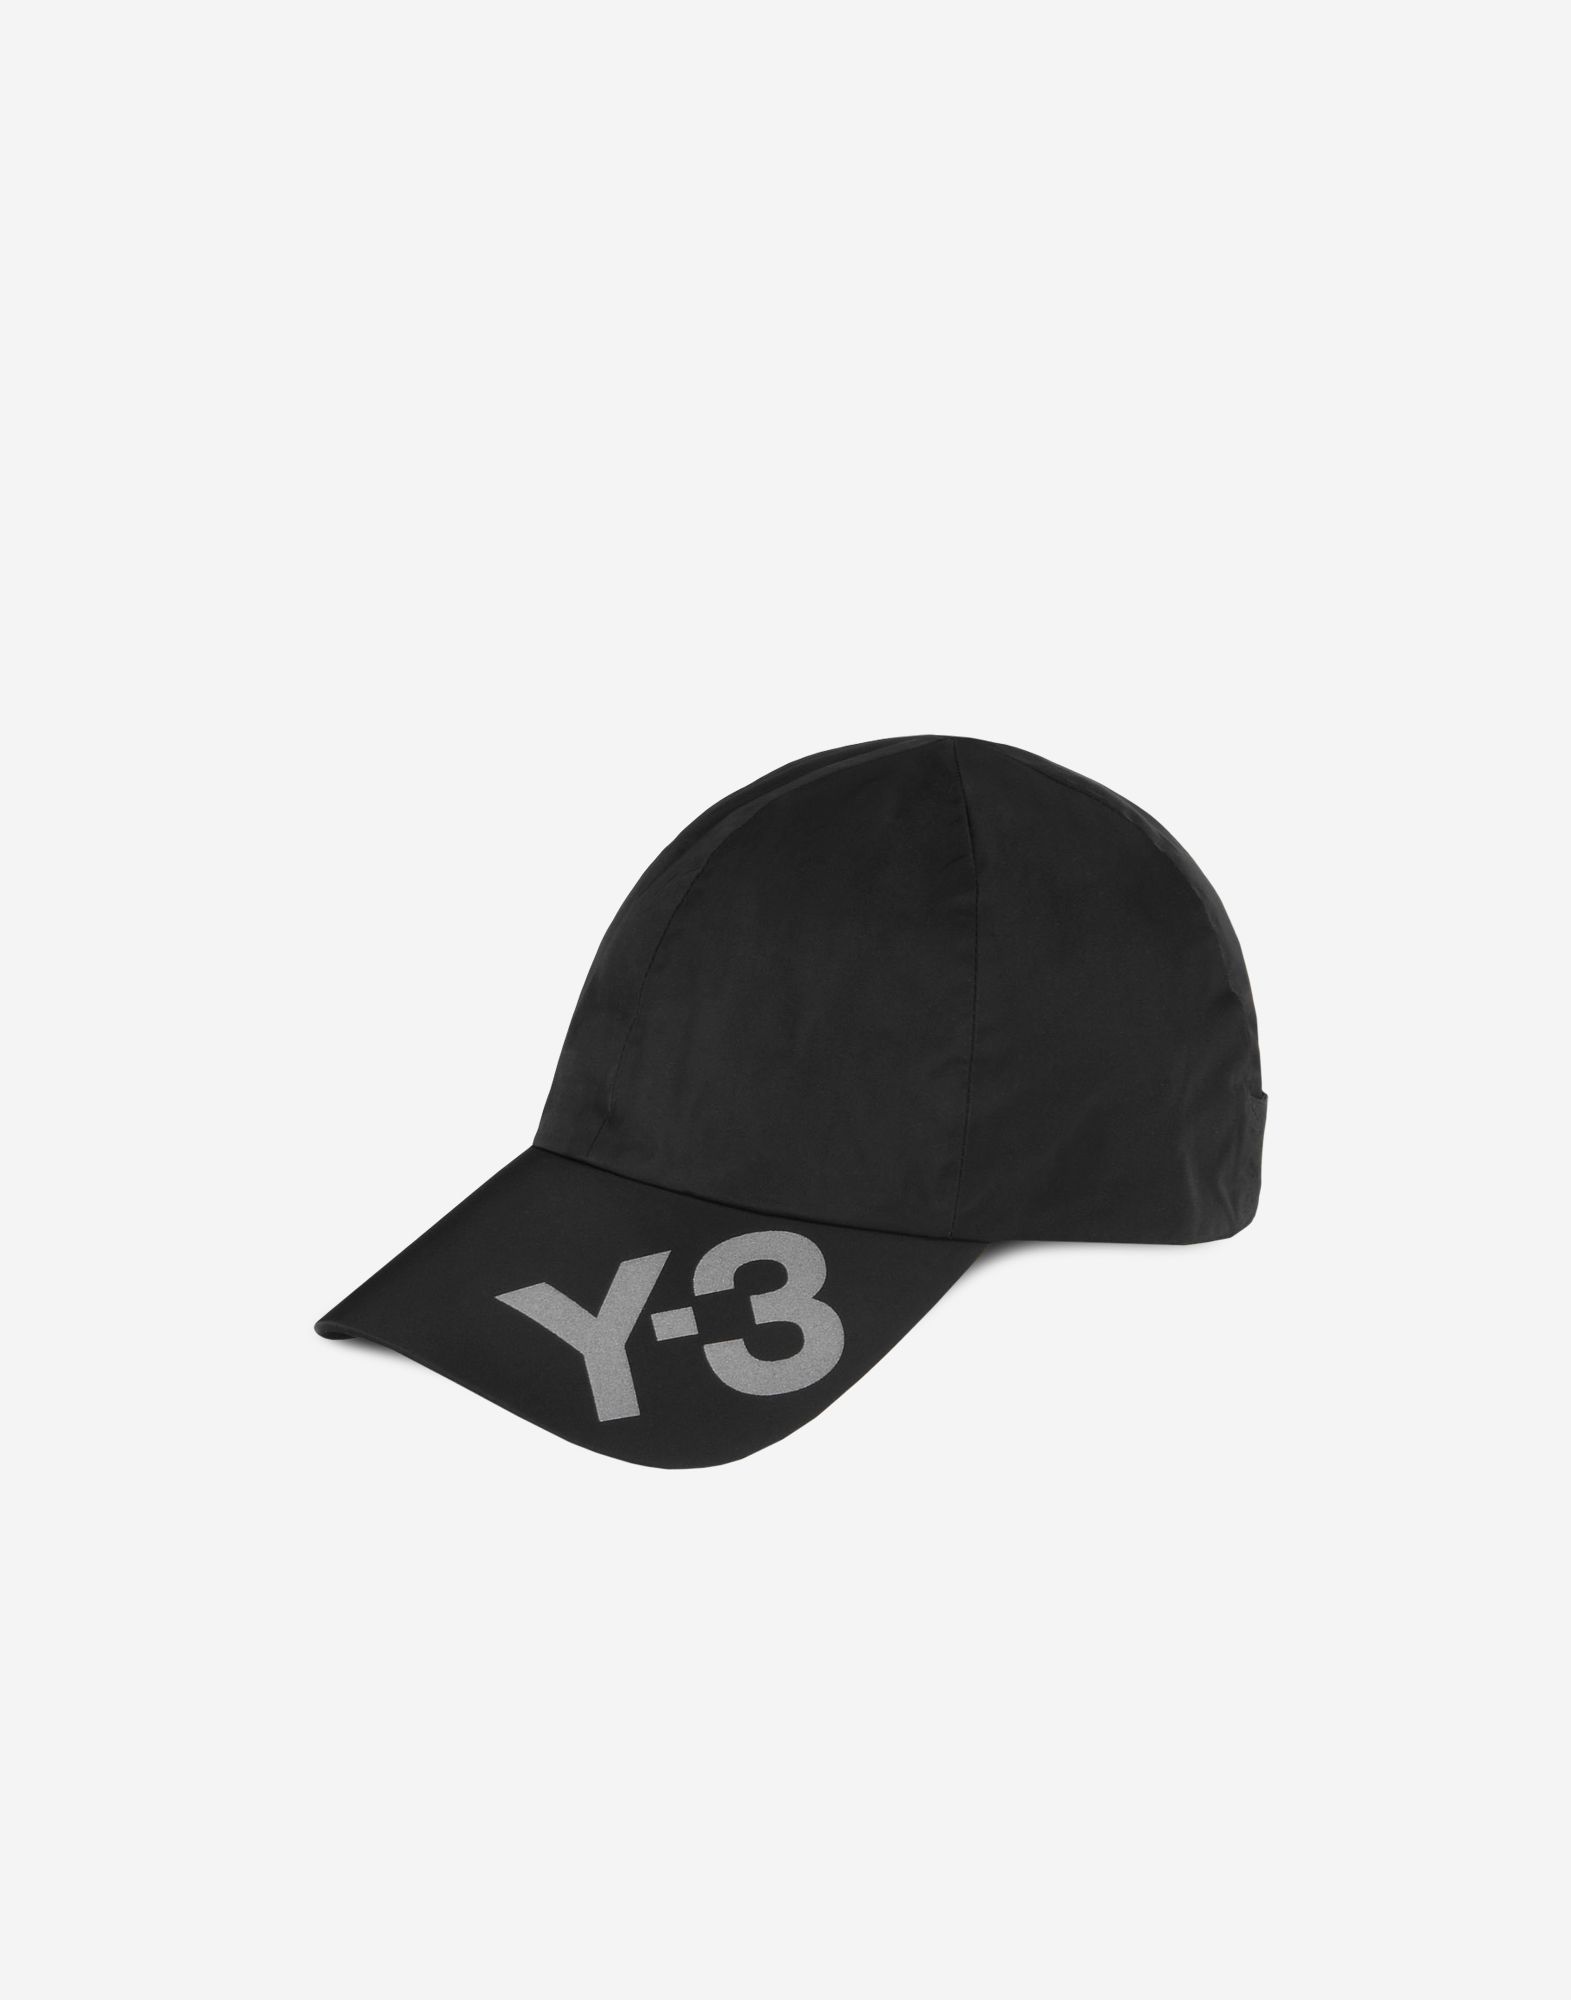 Y 3 Baseball Fit Tech Cap for Women | Adidas Y-3 Official Store